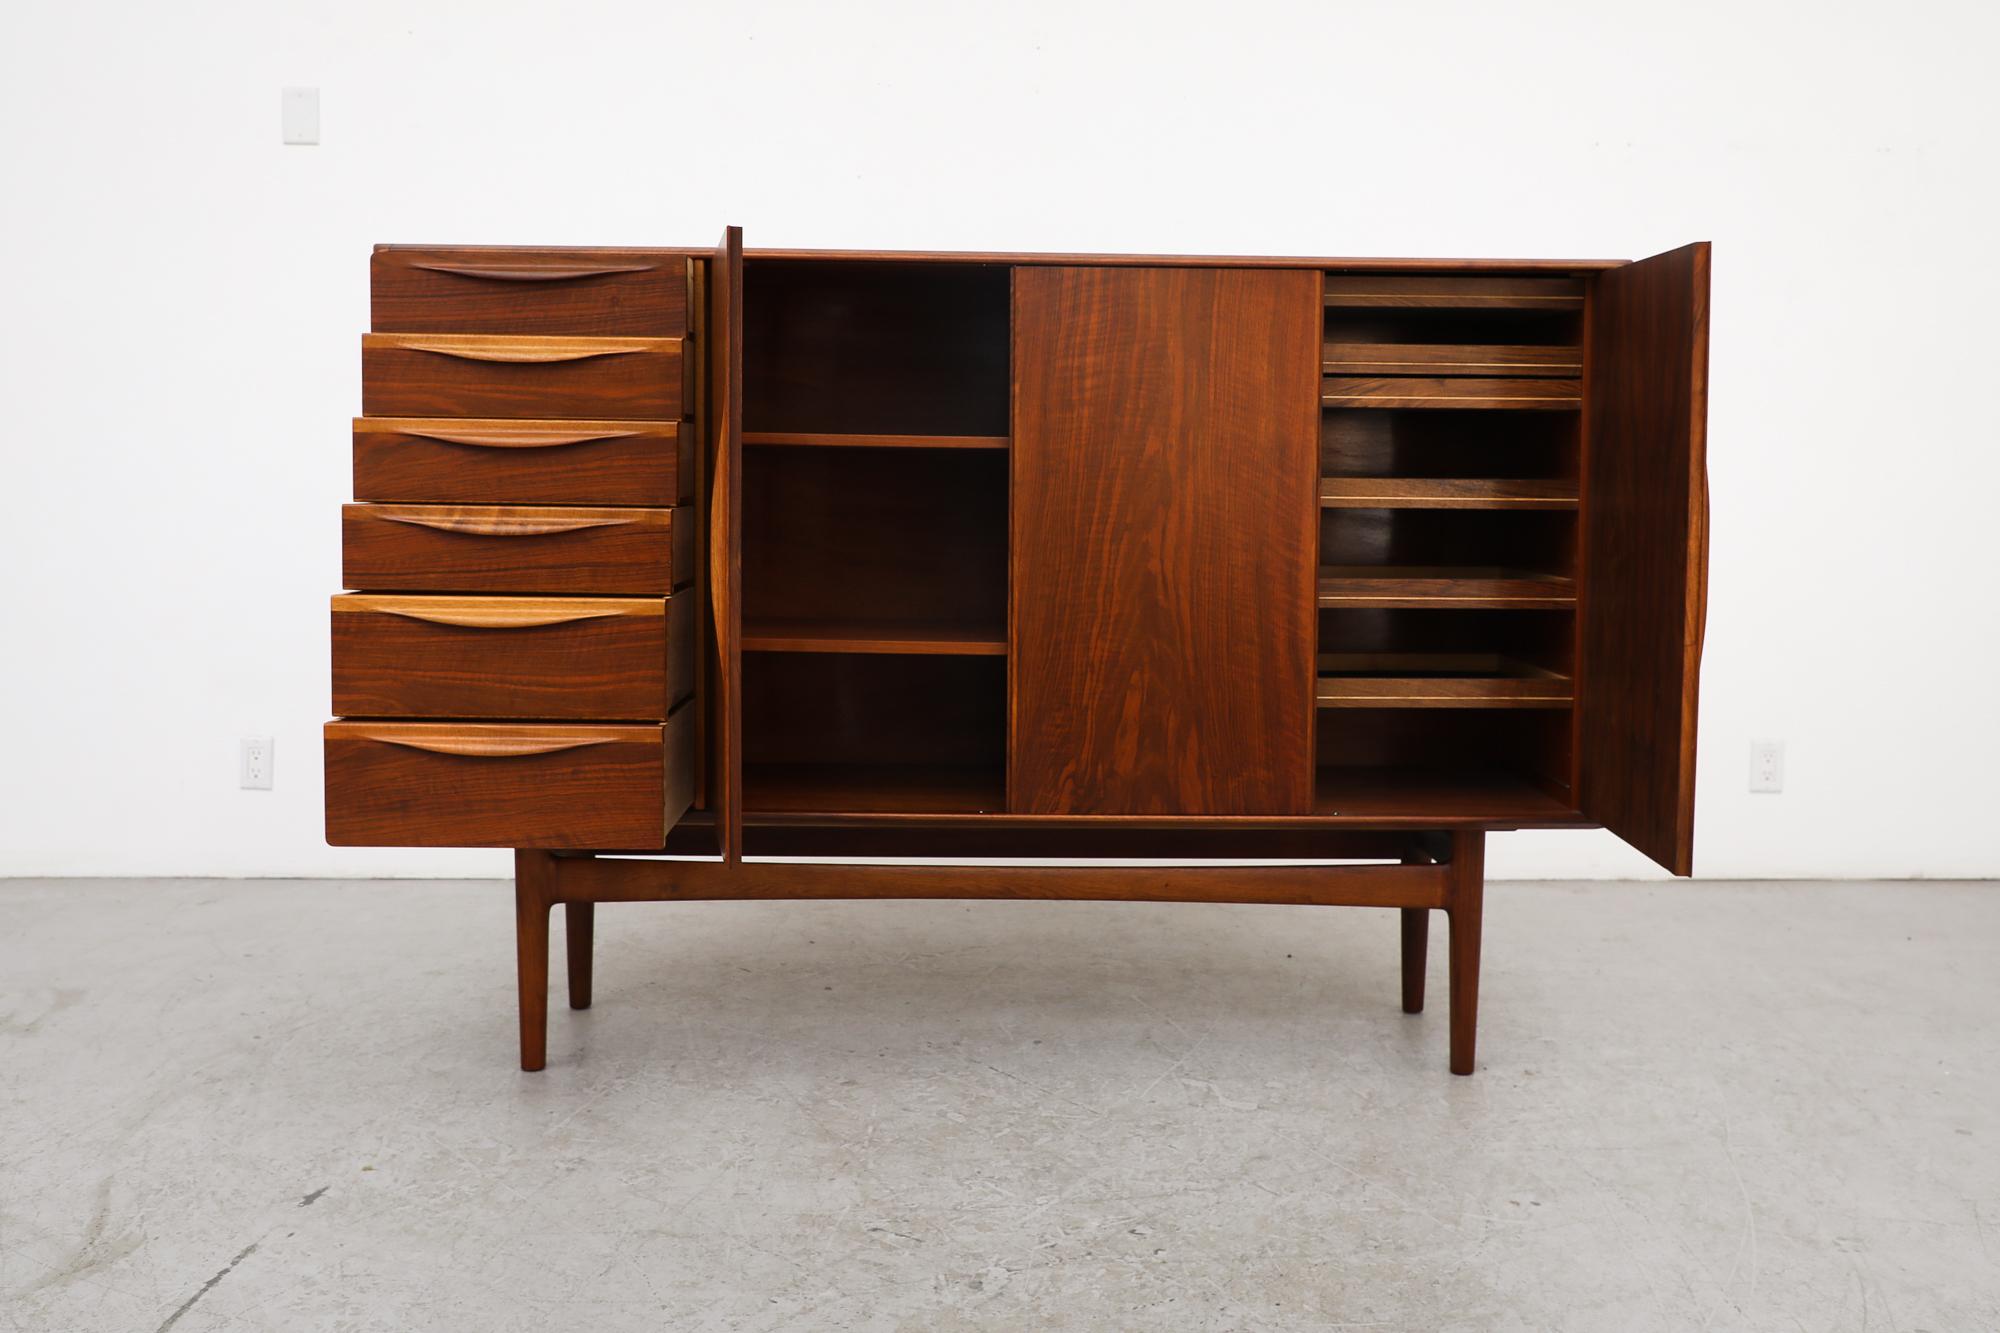 1960's Danish highboard by Henry Rosengren Hansen for Brande Mobelindustrie. Highboard is made from walnut, has side drawers and smaller drawers inside cabinet. In original condition with visible wear consistent with its age and use.